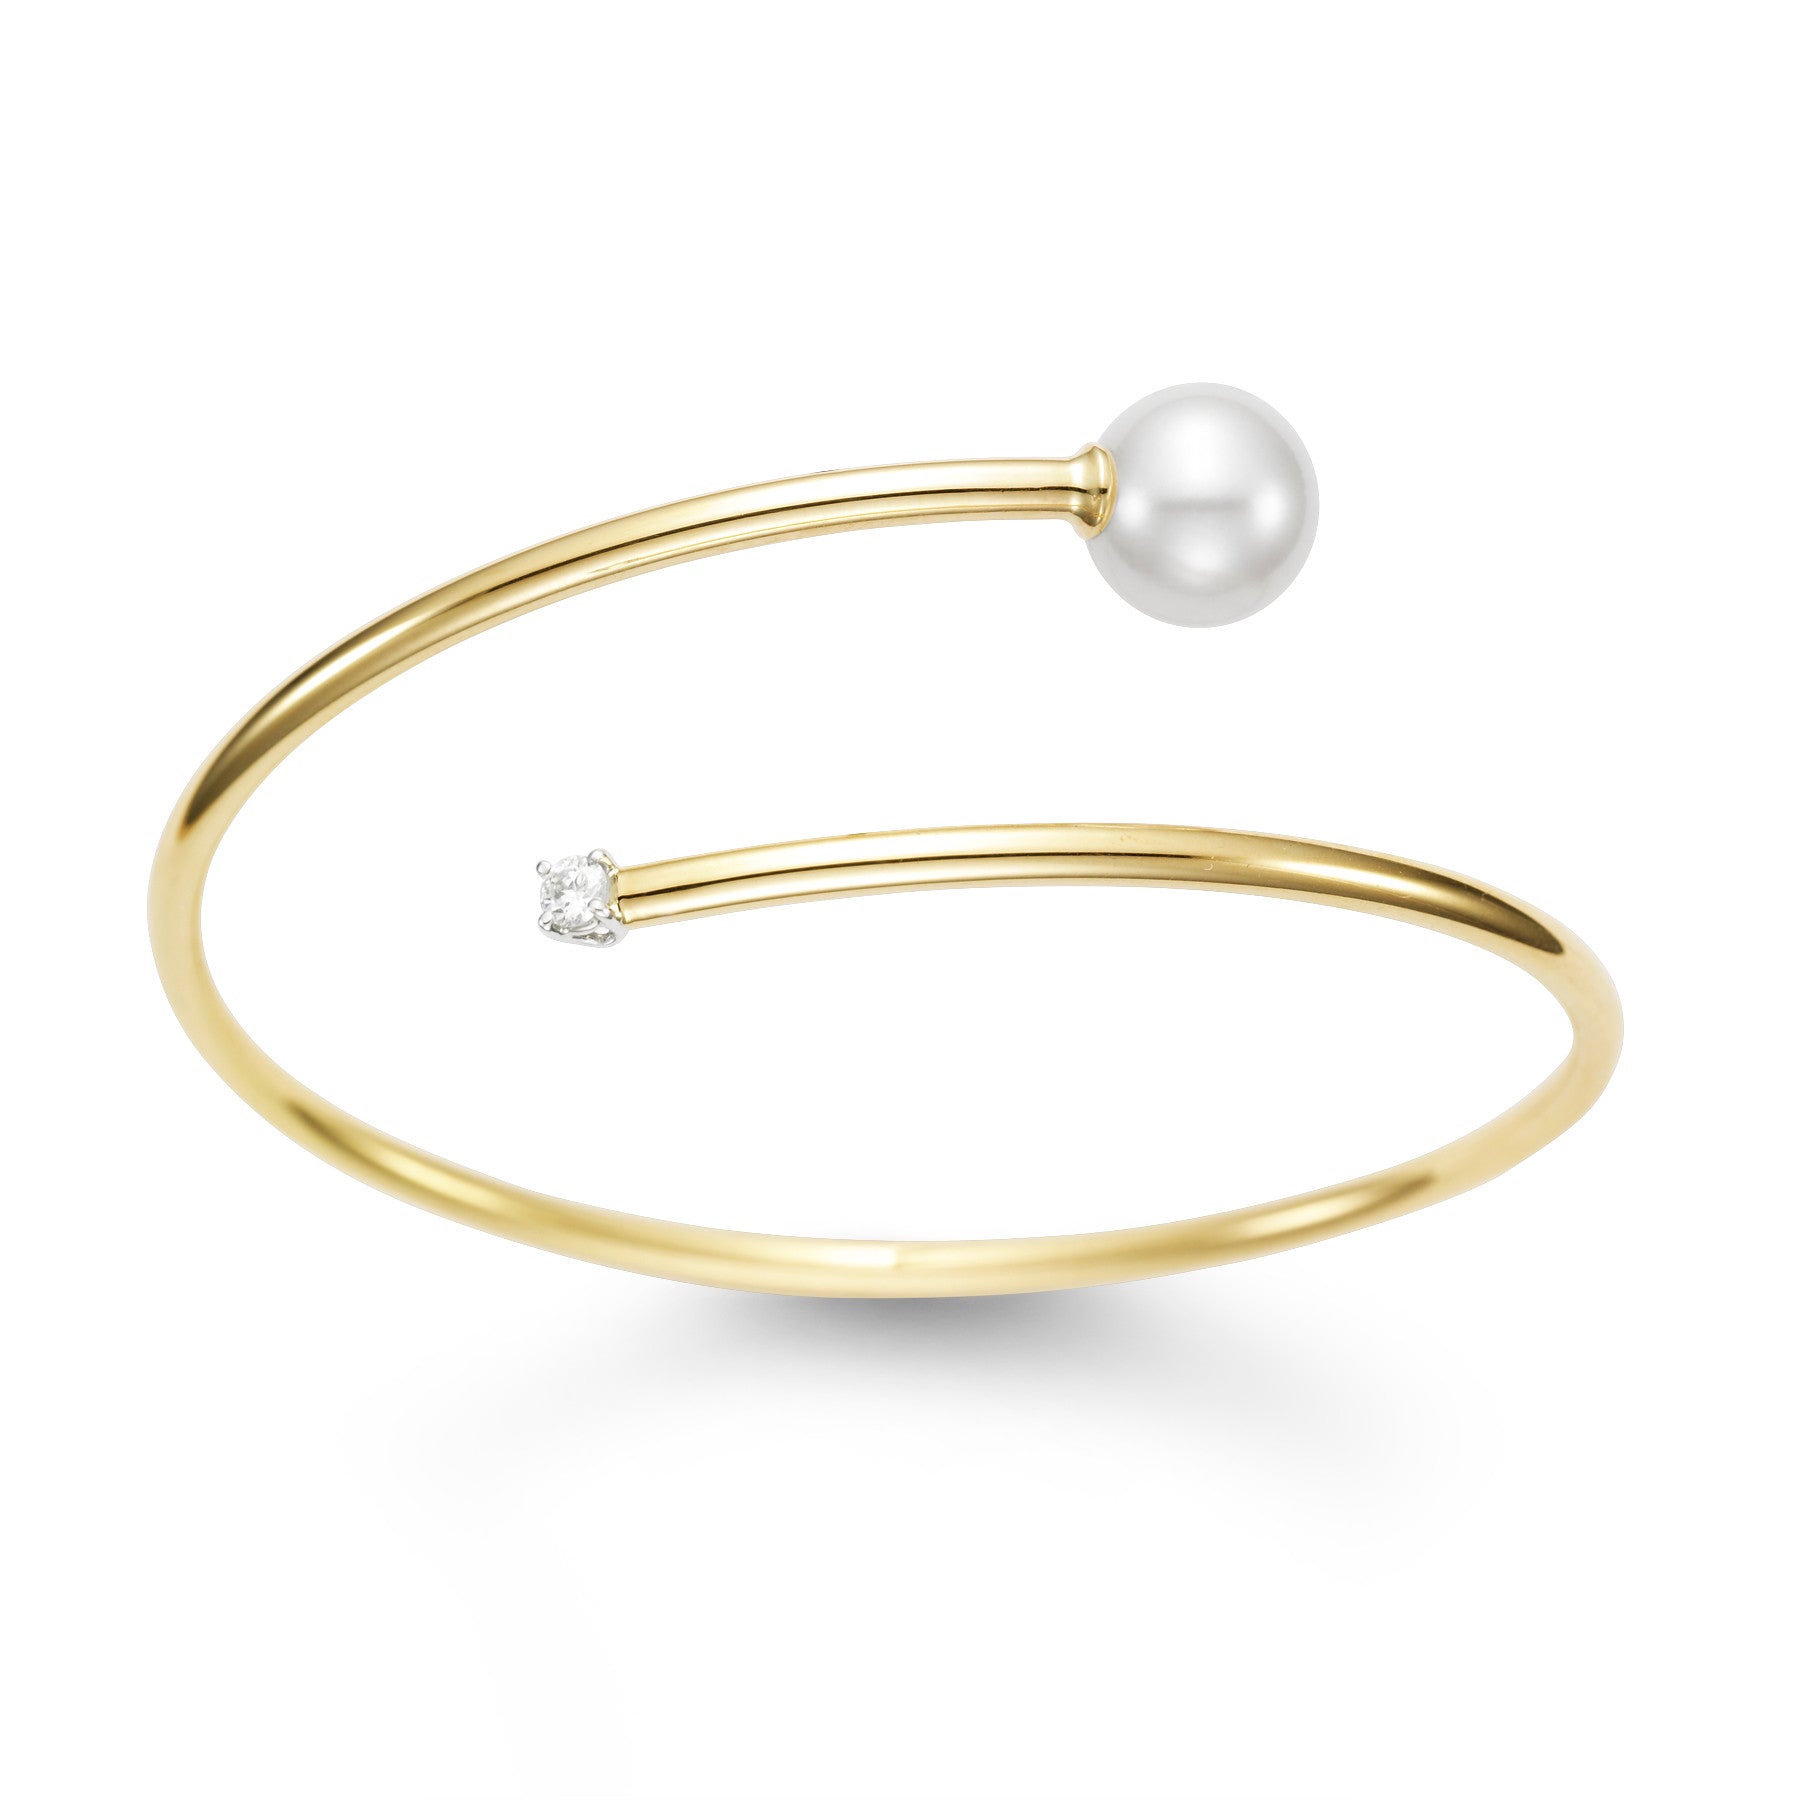 Lovely 18k yellow gold bracelet with Pearl and diamond accent. 